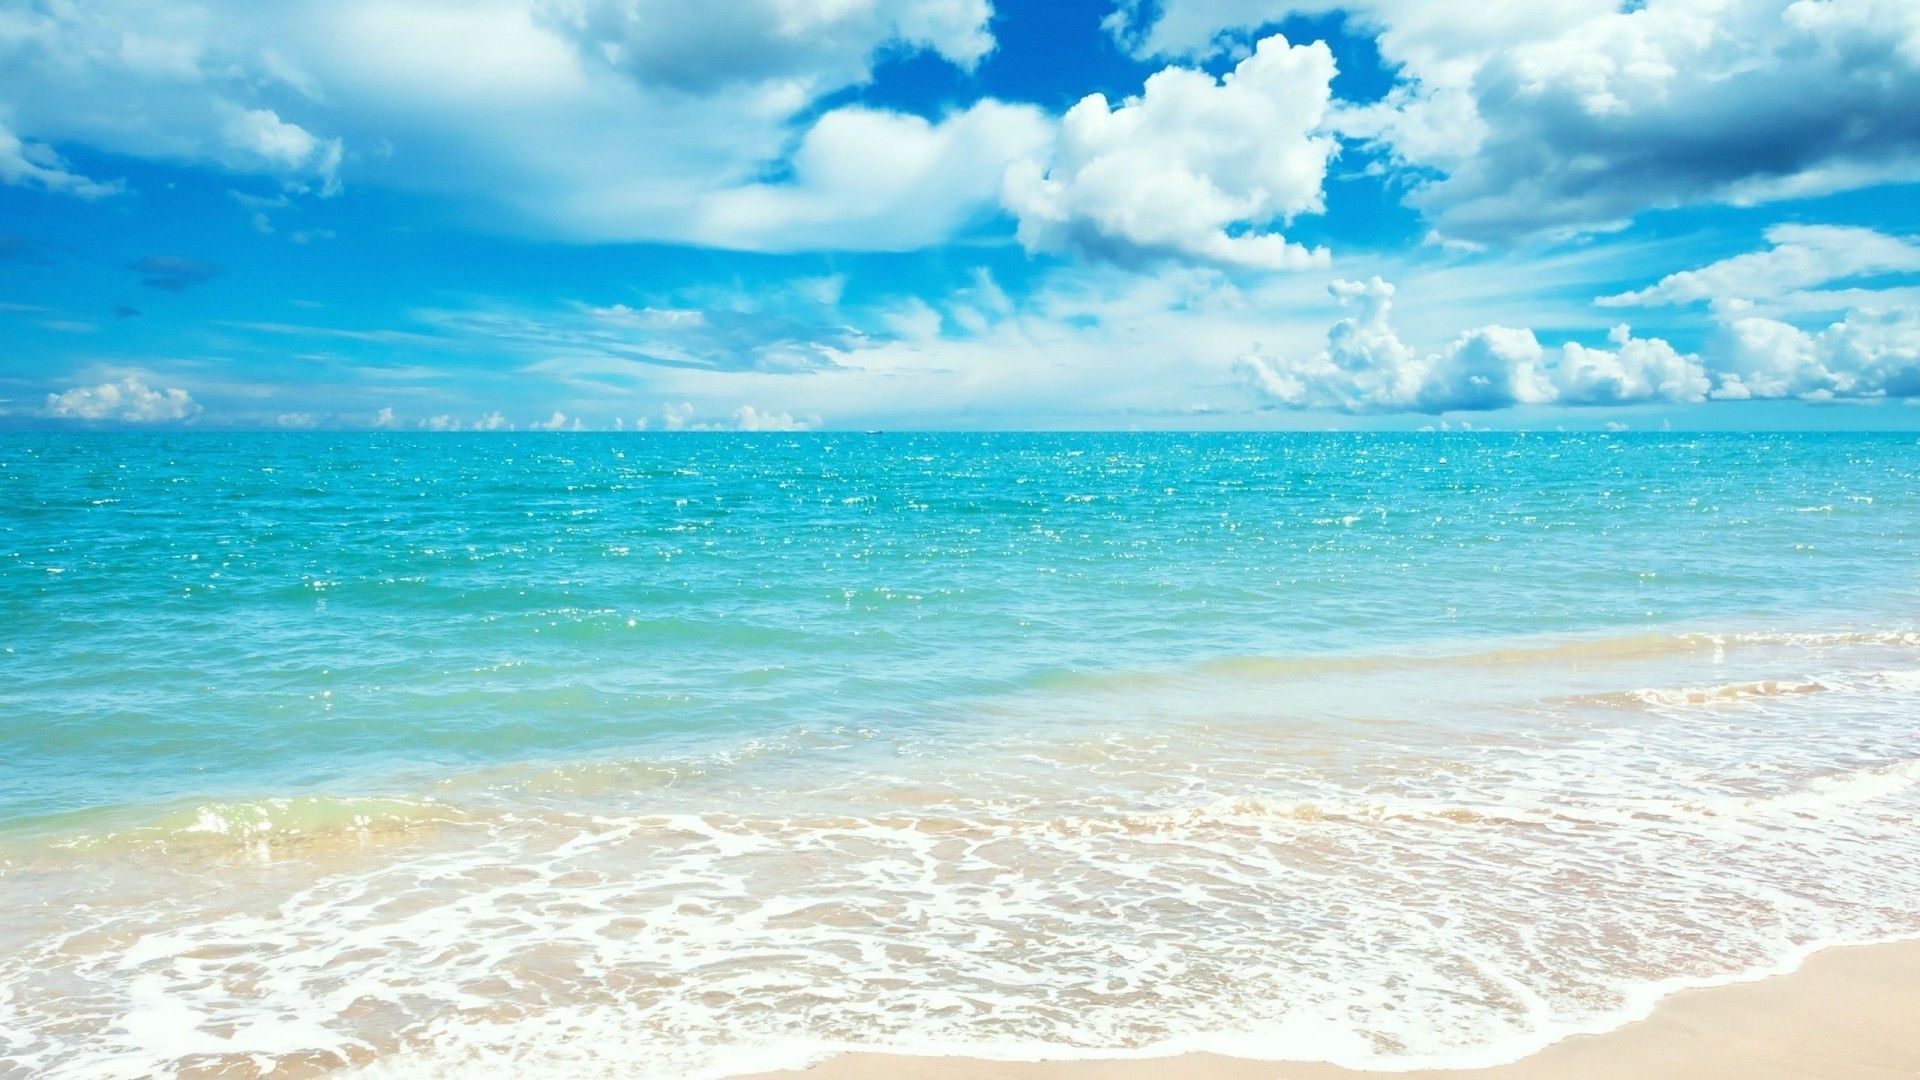 550 Aesthetic Beach Pictures  Download Free Images on Unsplash